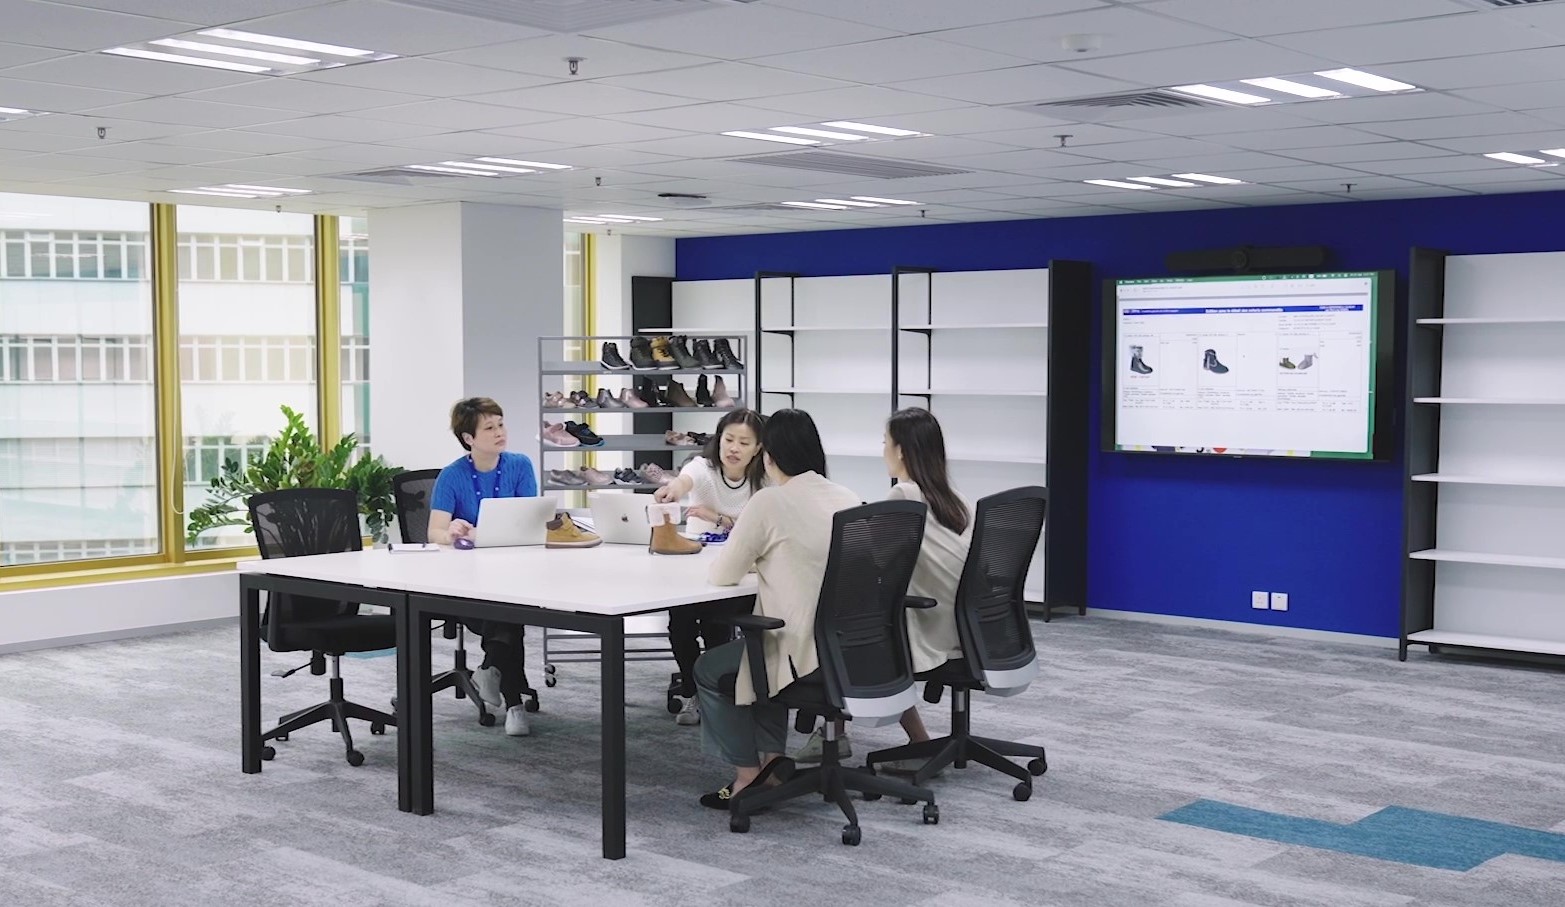 The new shared spaces allow SIPLEC’s employees to present the company’s products physically or online and be more efficient at work.